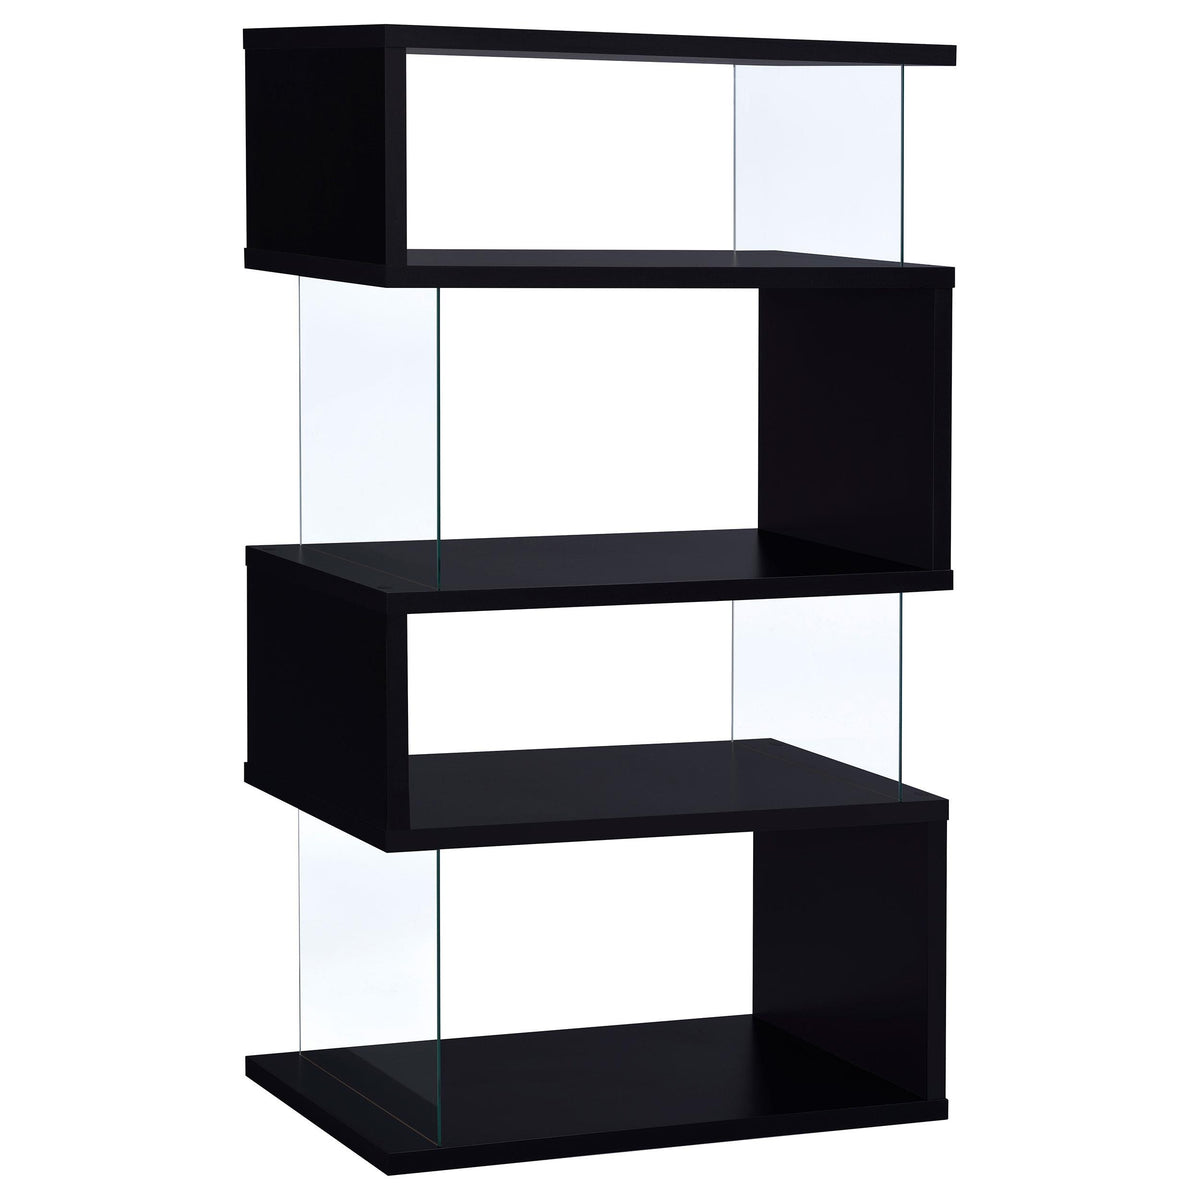 Emelle 4-tier Bookcase Black and Clear Emelle 4-tier Bookcase Black and Clear Half Price Furniture